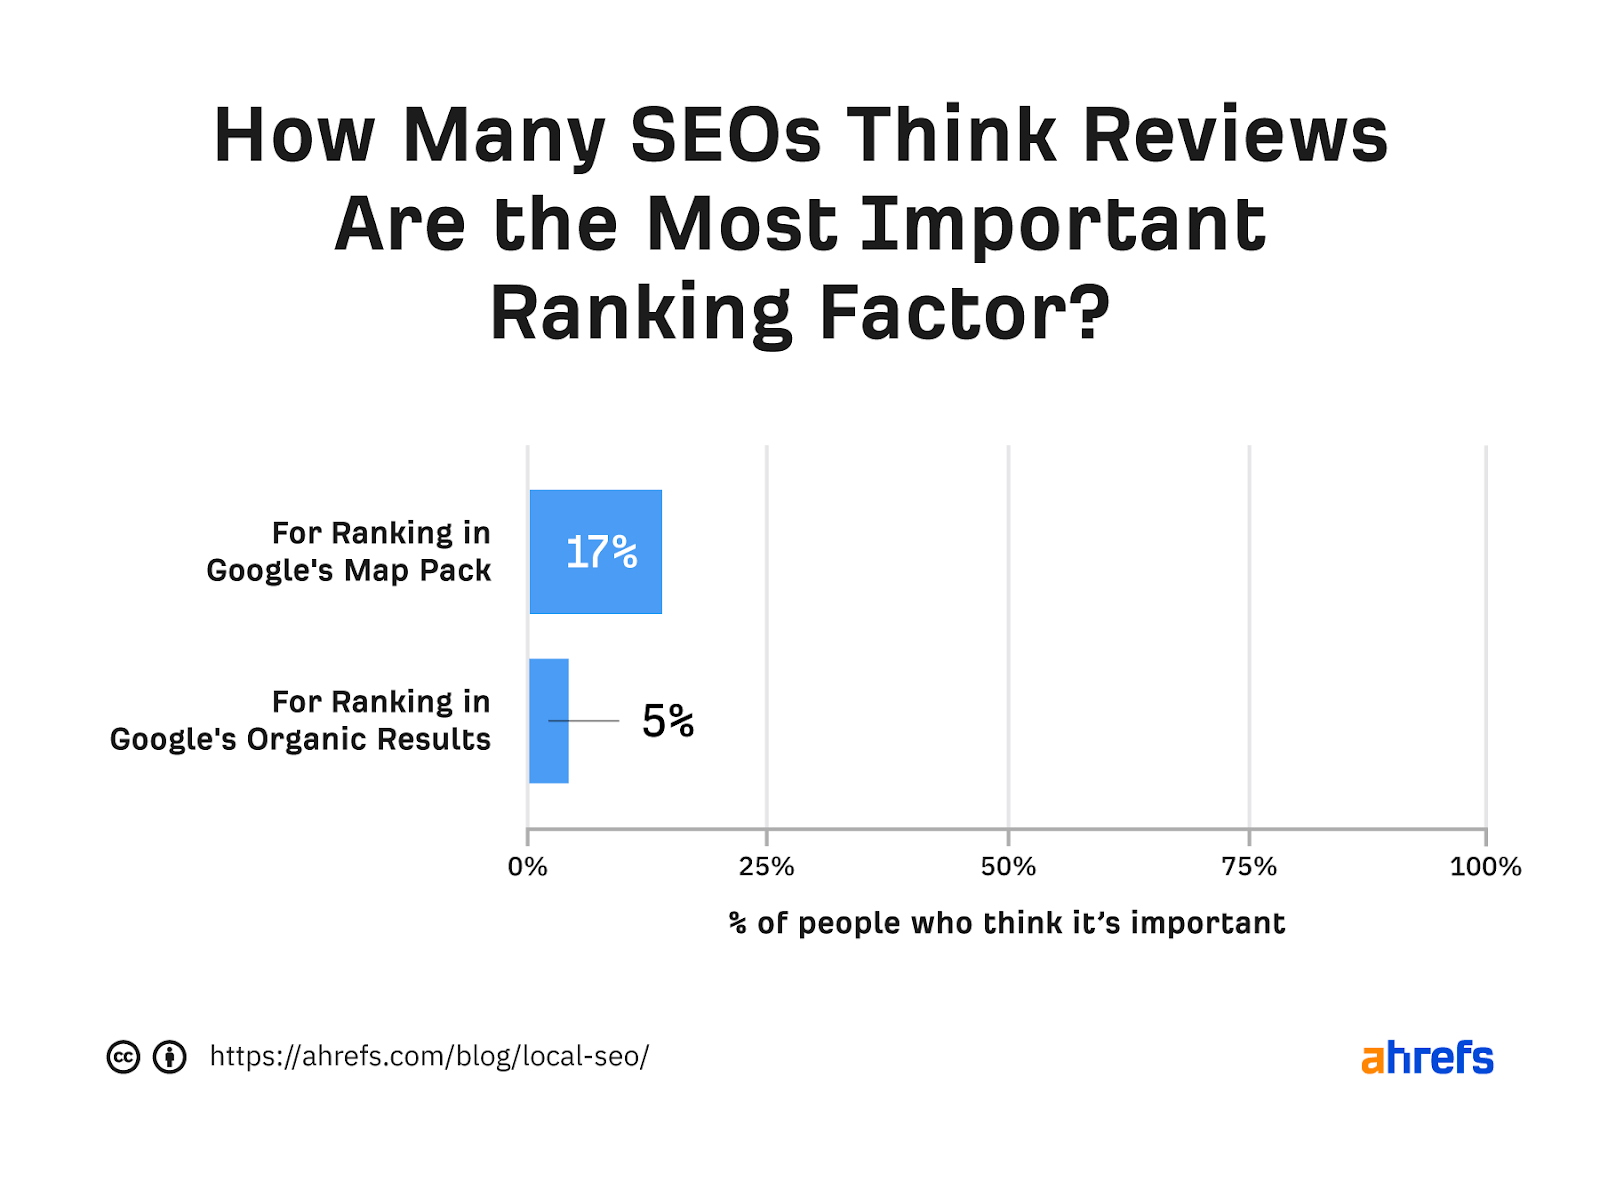 Bar graph showing percentage of SEOs who think reviews are most important ranking factor for "map pack" and "regular" results, respectively